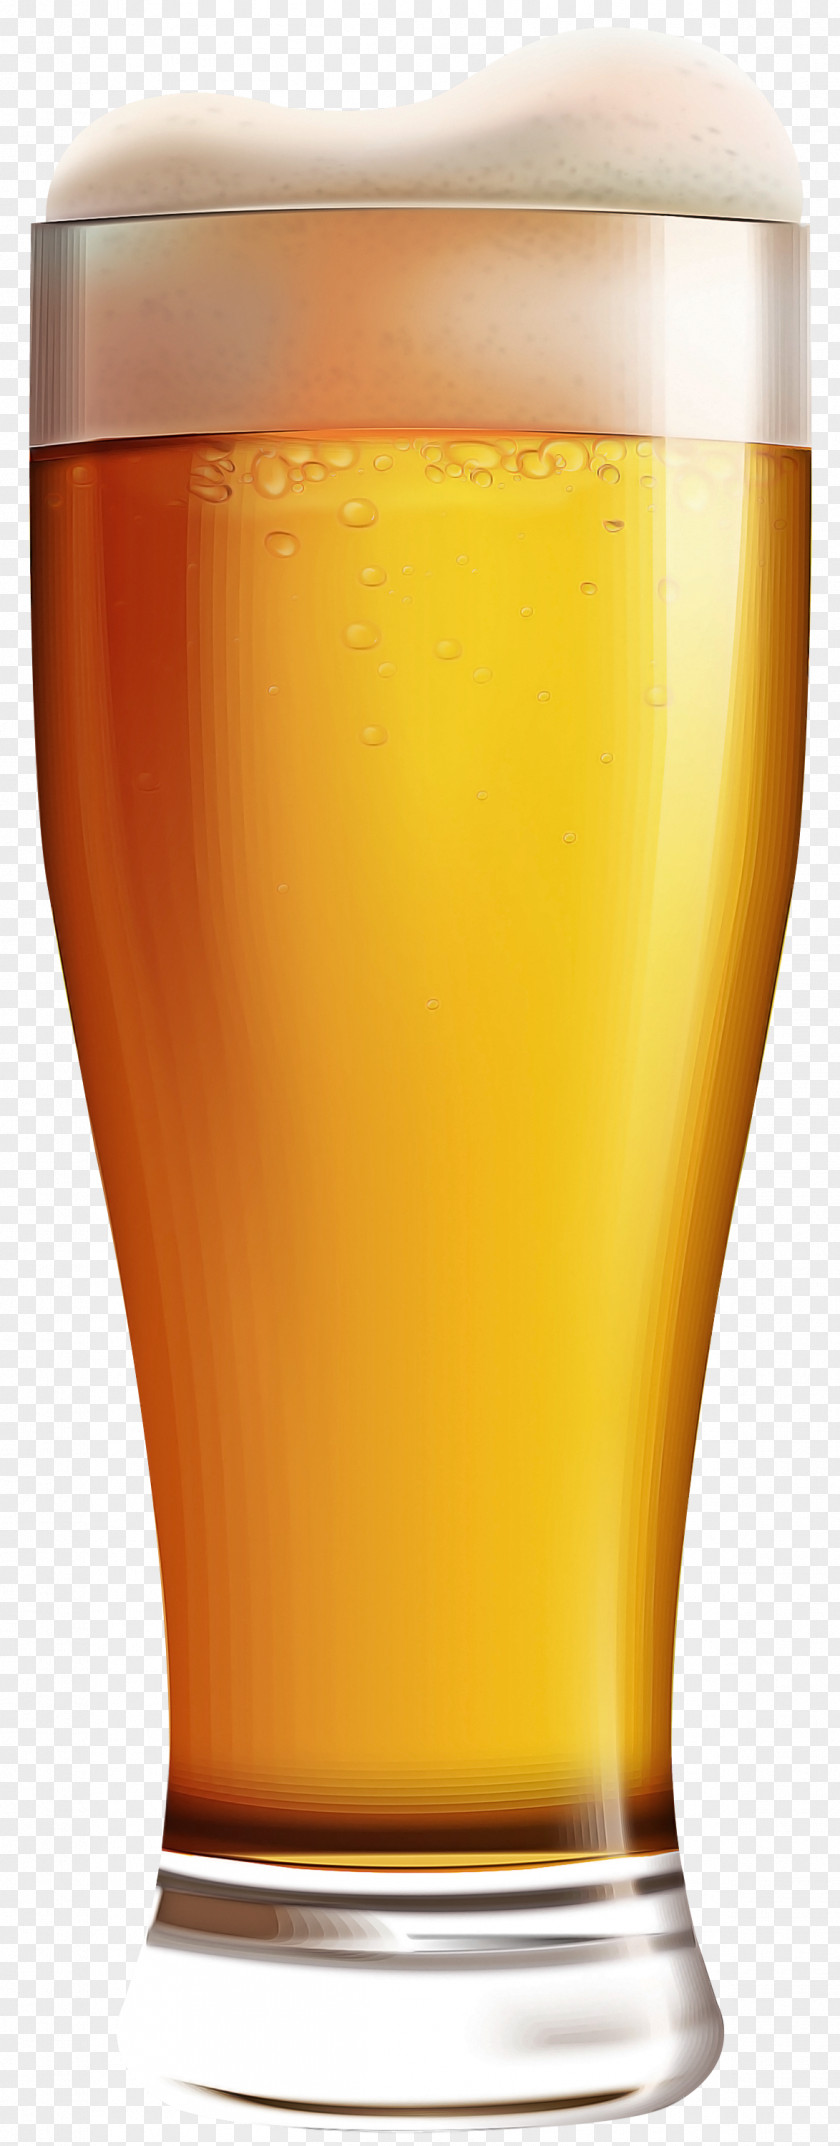 Nonalcoholic Beverage Alcoholic Beer Glass Pint Drink Juice Yellow PNG